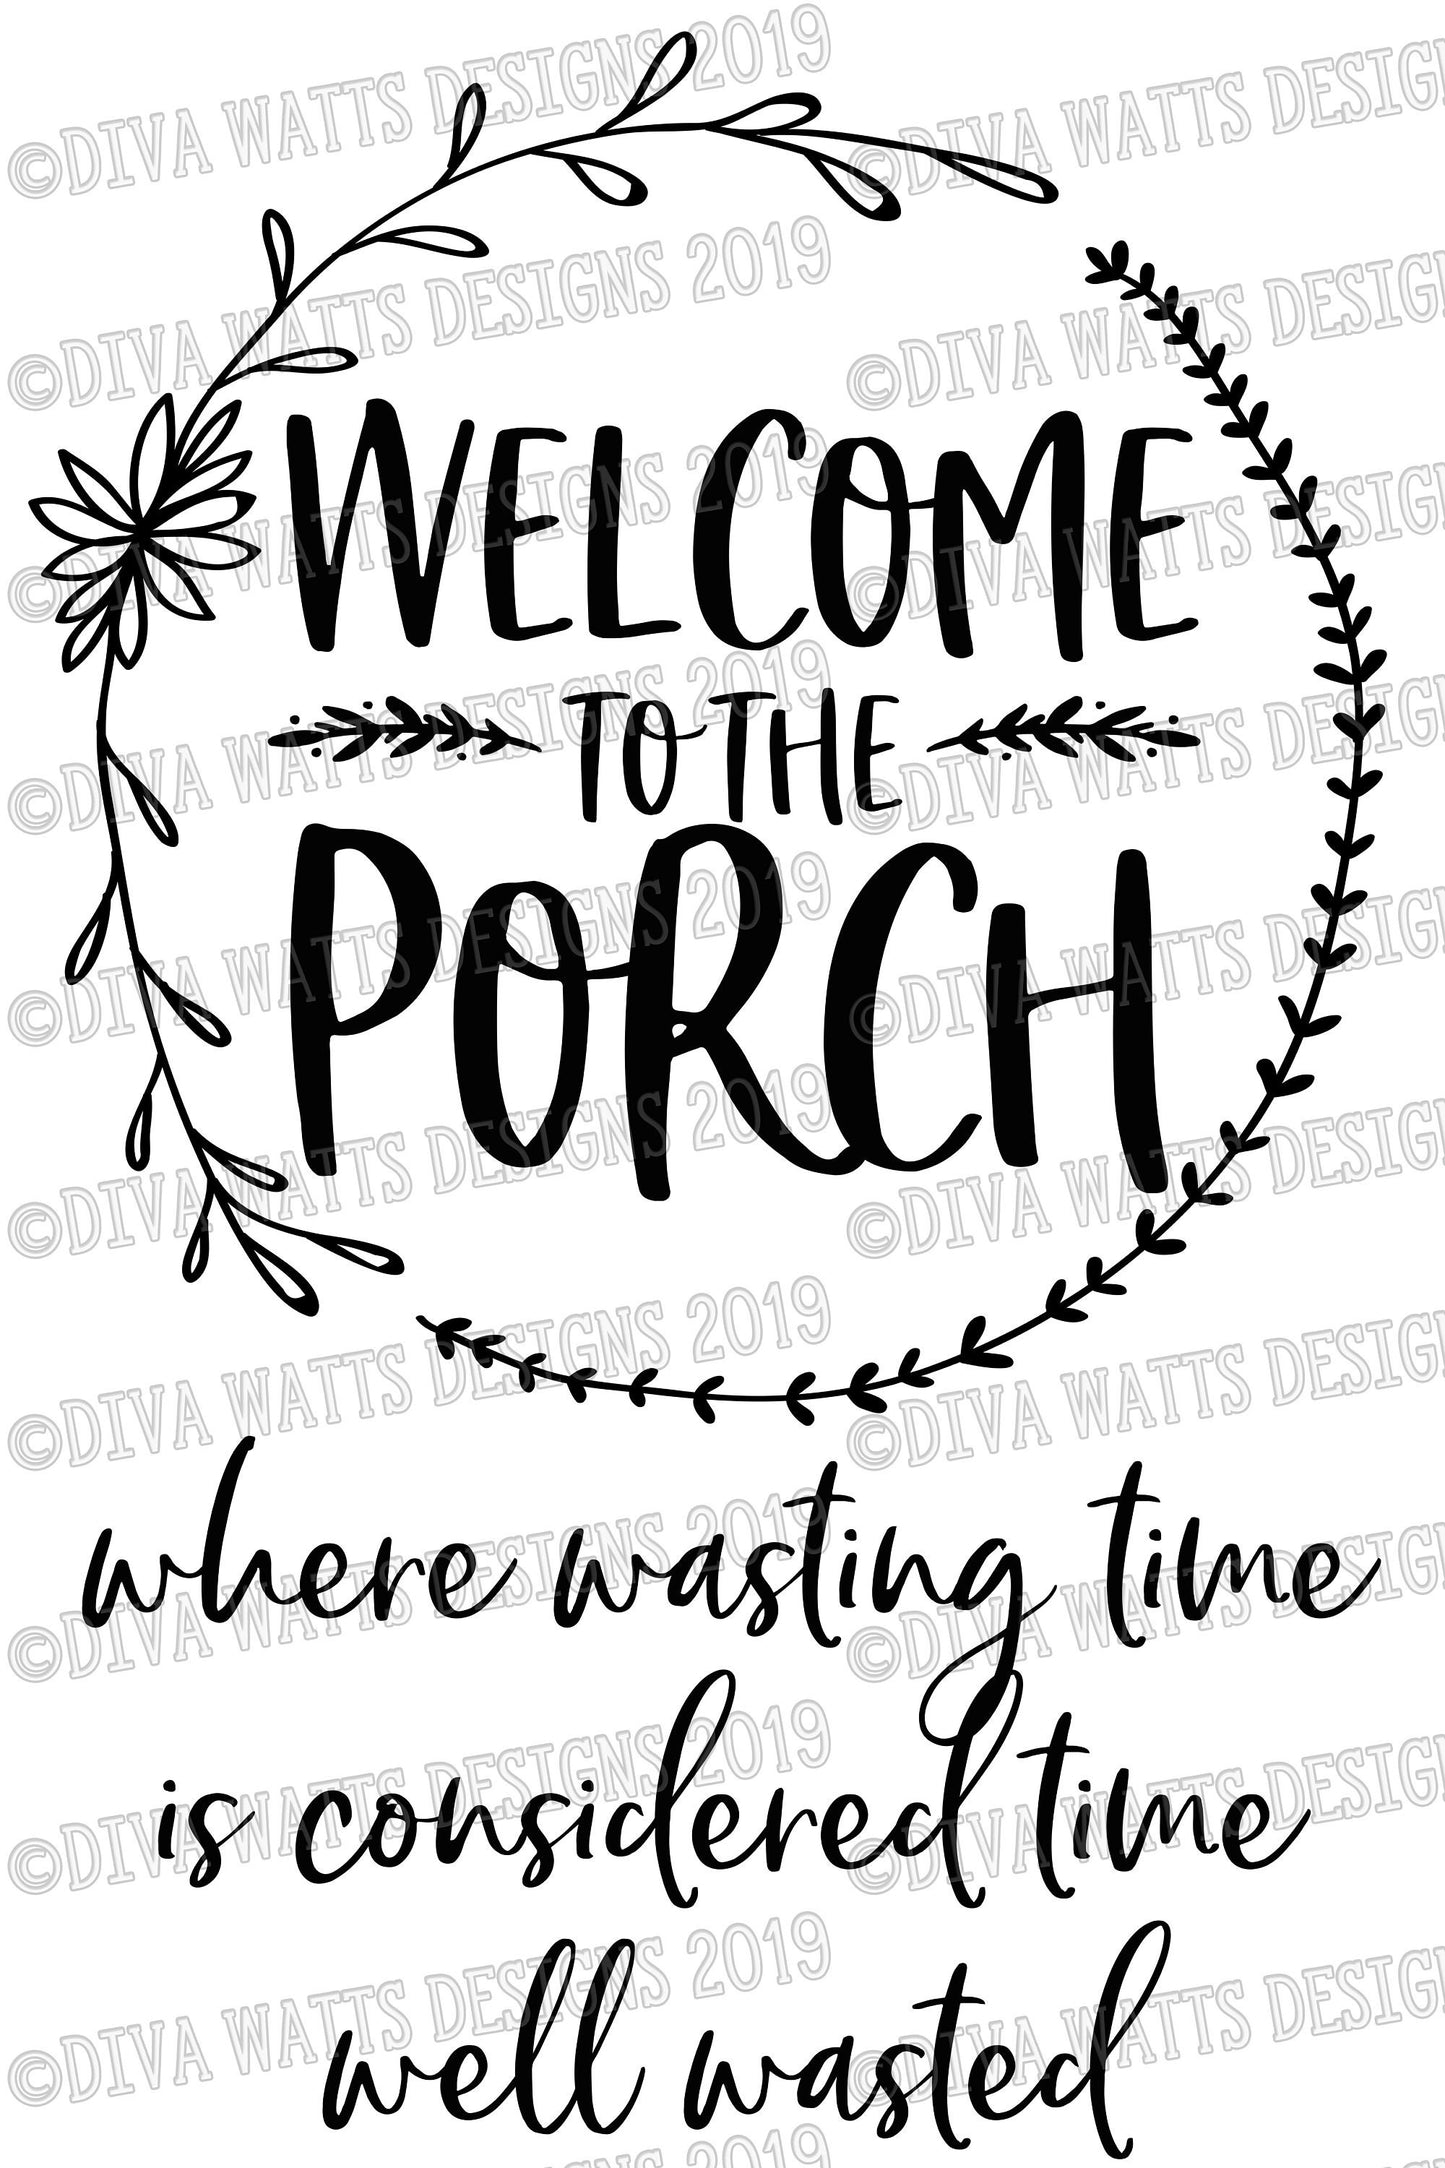 SVG Welcome to the Porch | Cutting File | Where wasting time is considered time well wasted | DXF PNG eps jpg | Instant Download | Cricut